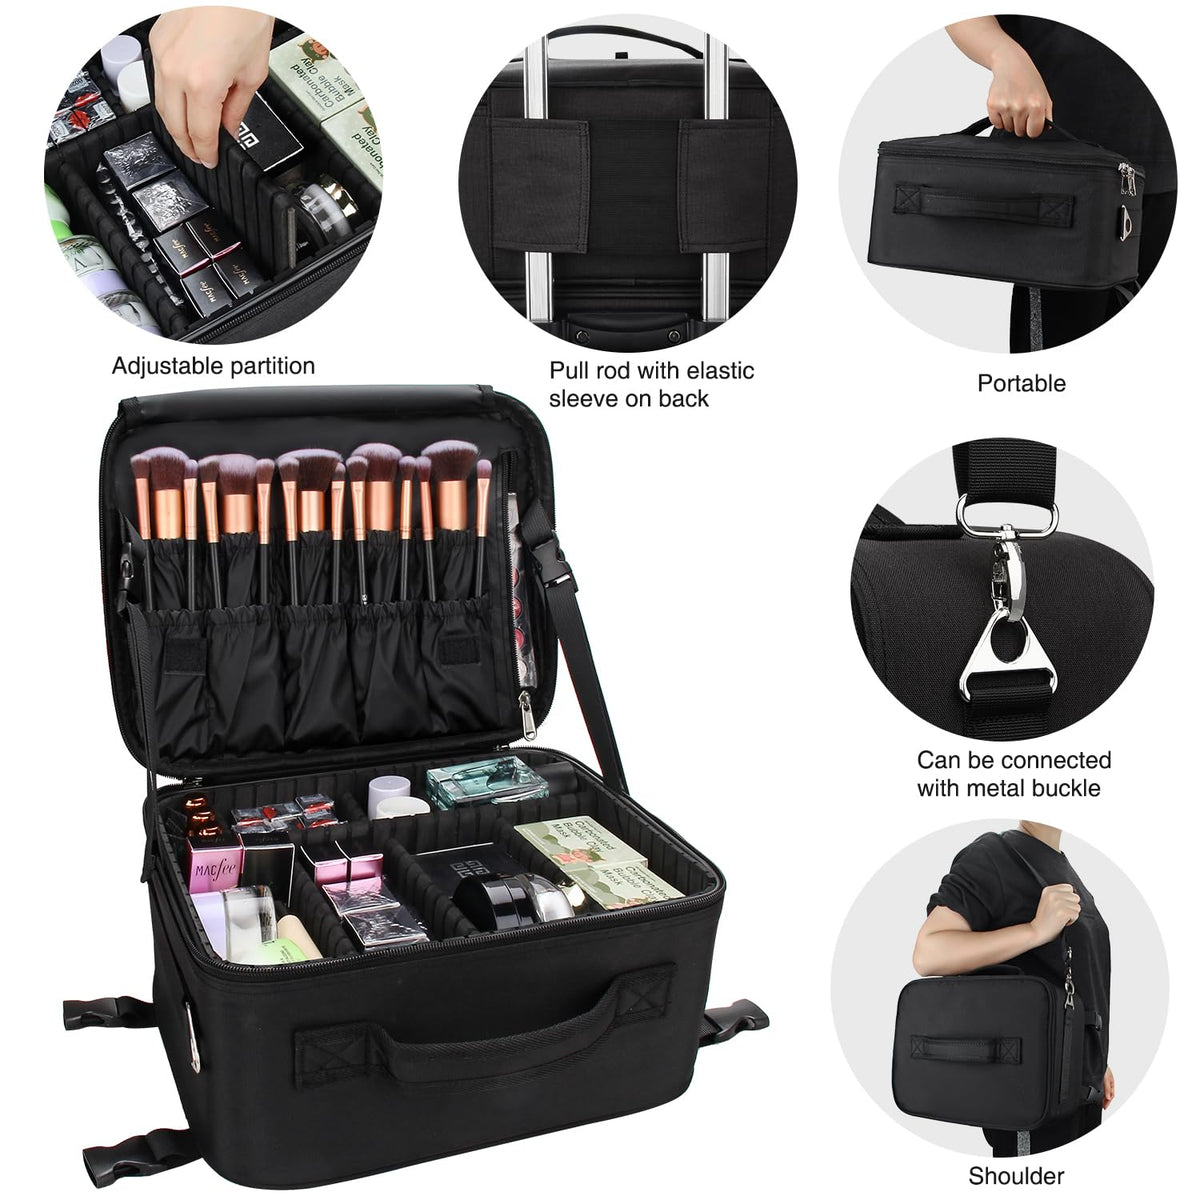  Relavel Extra Large Makeup Case Rolling Travel Train Case, 3  Layer with Insulation Compartment & Four Clear Storage Bags, Professional  Makeup Artist Bag Portable Nail Organizer Box Art Supply Case 